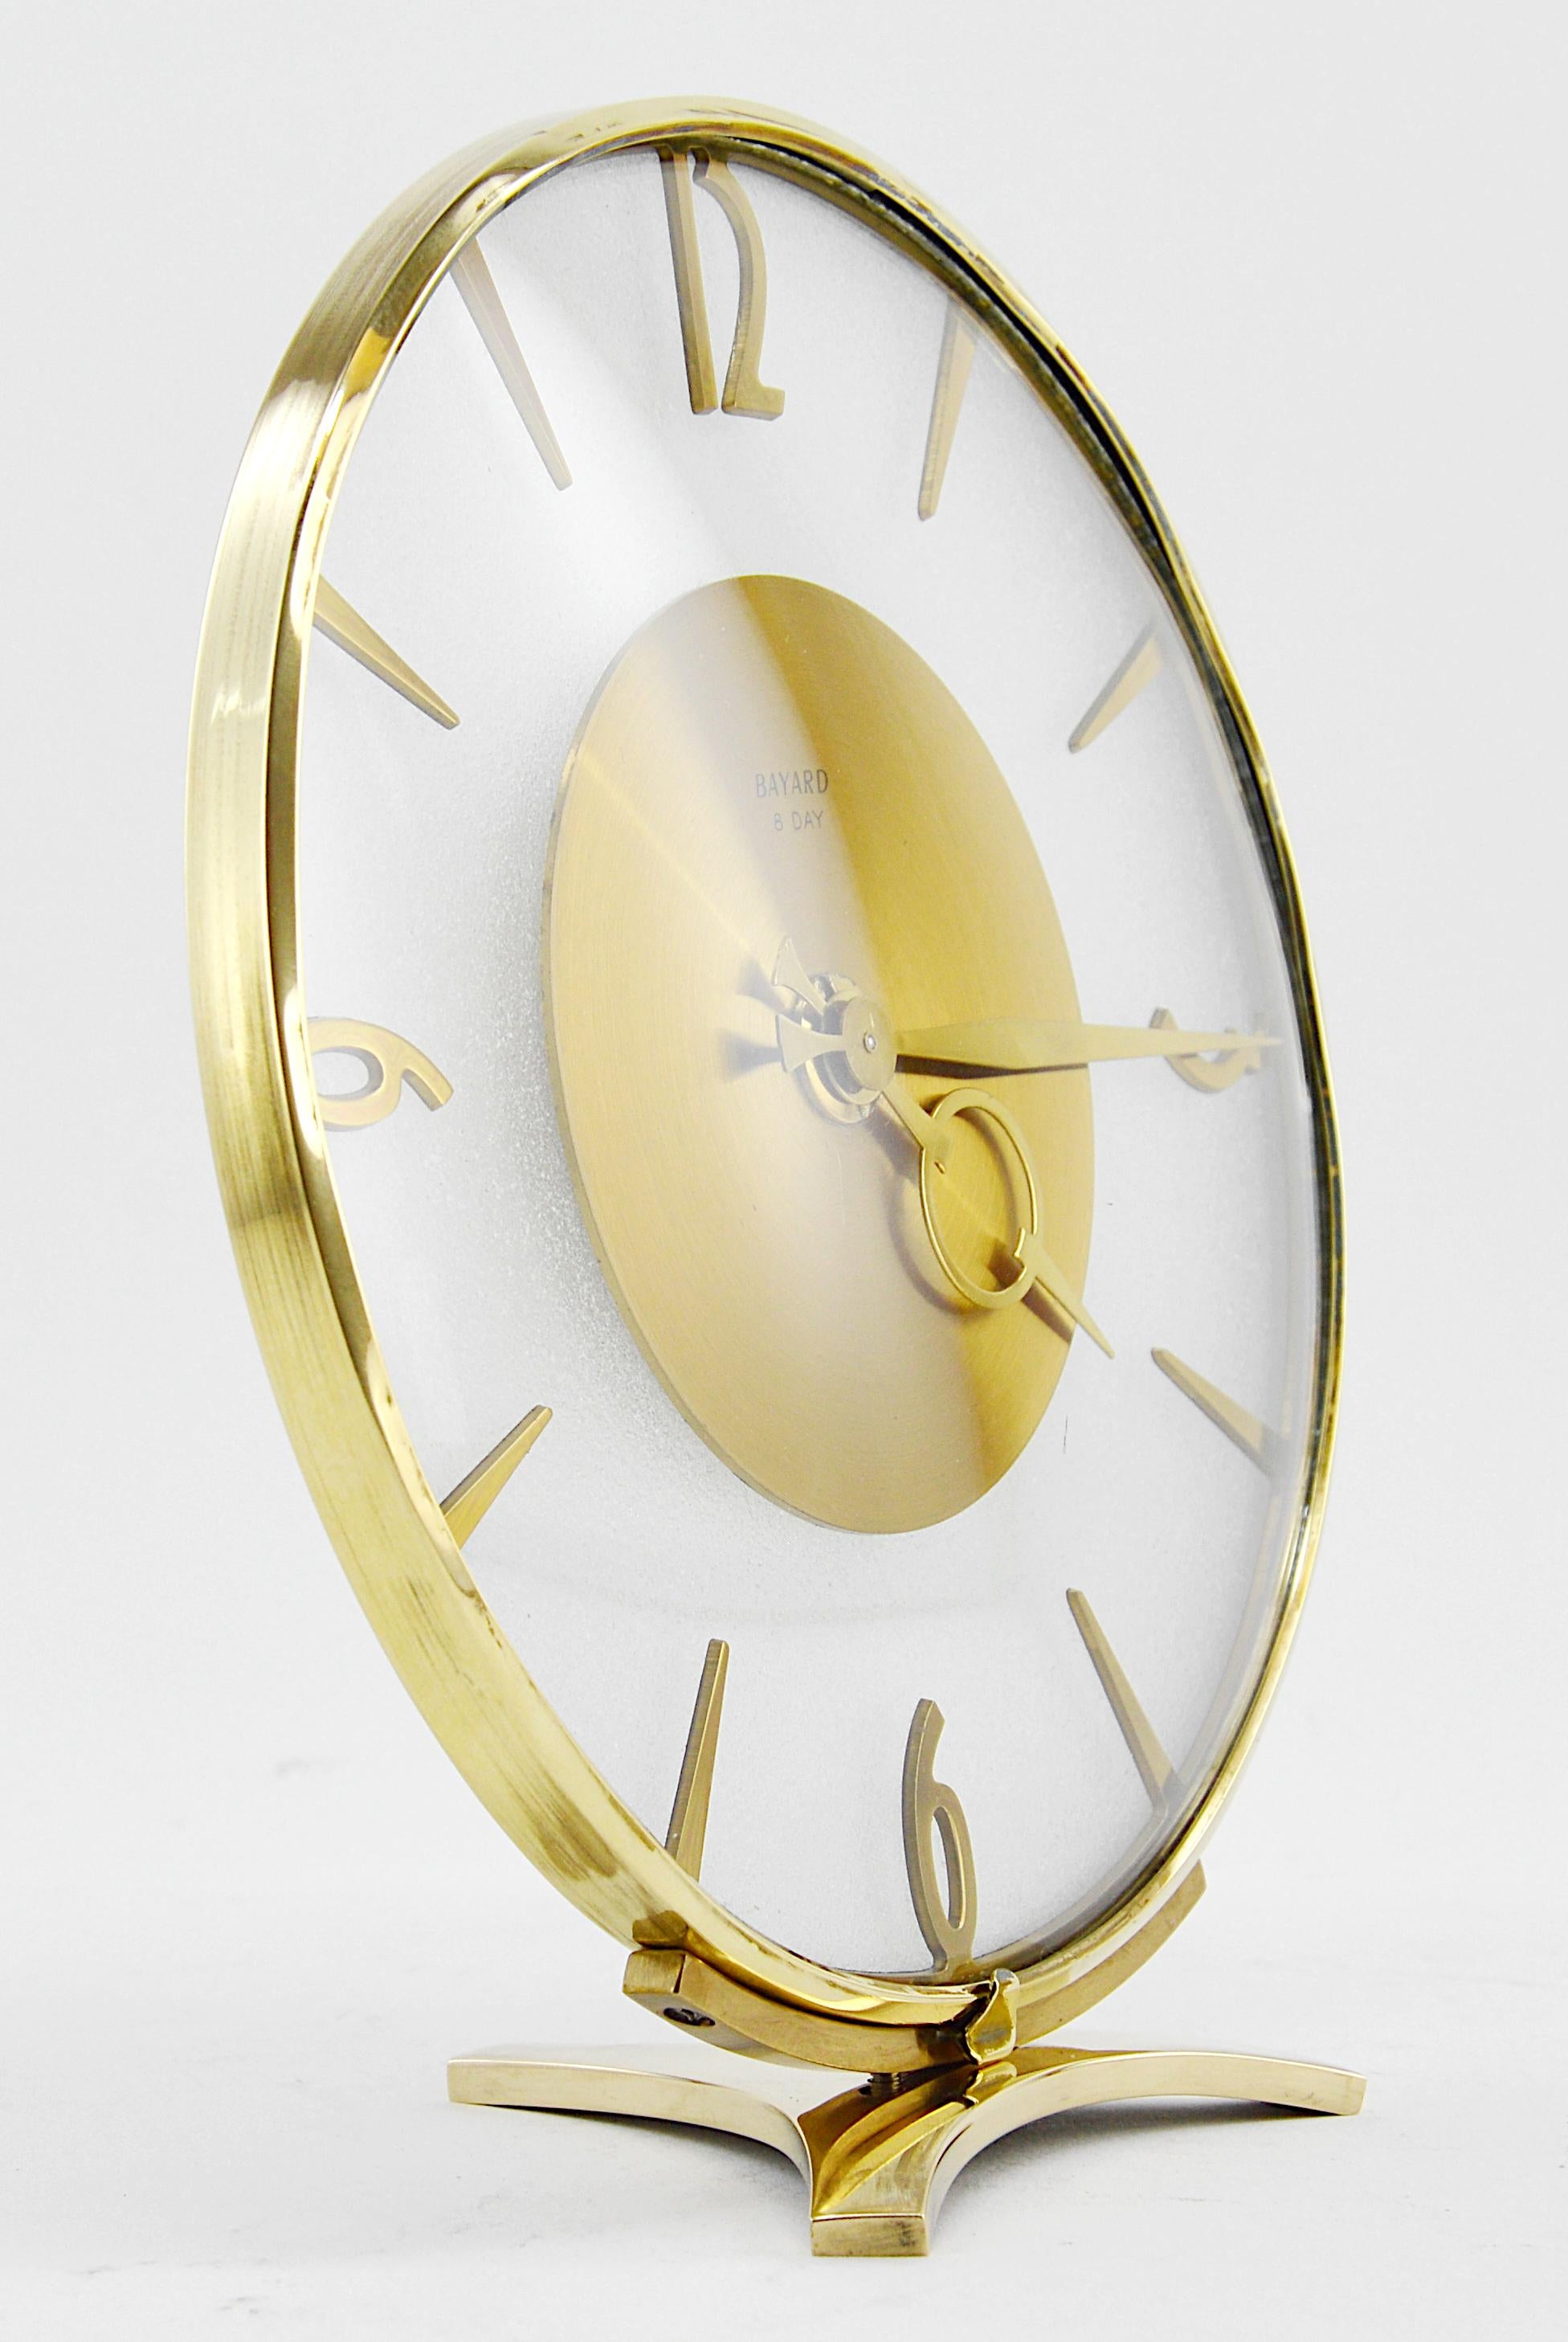 Summer sales. We are renewing our stock waiting for the start of September. Do not wait to order this beautiful period piece, we only have one. French Art Deco clock by Bayard, France, 1930s. Brass and glass. Rounded front glass - Granitelike back